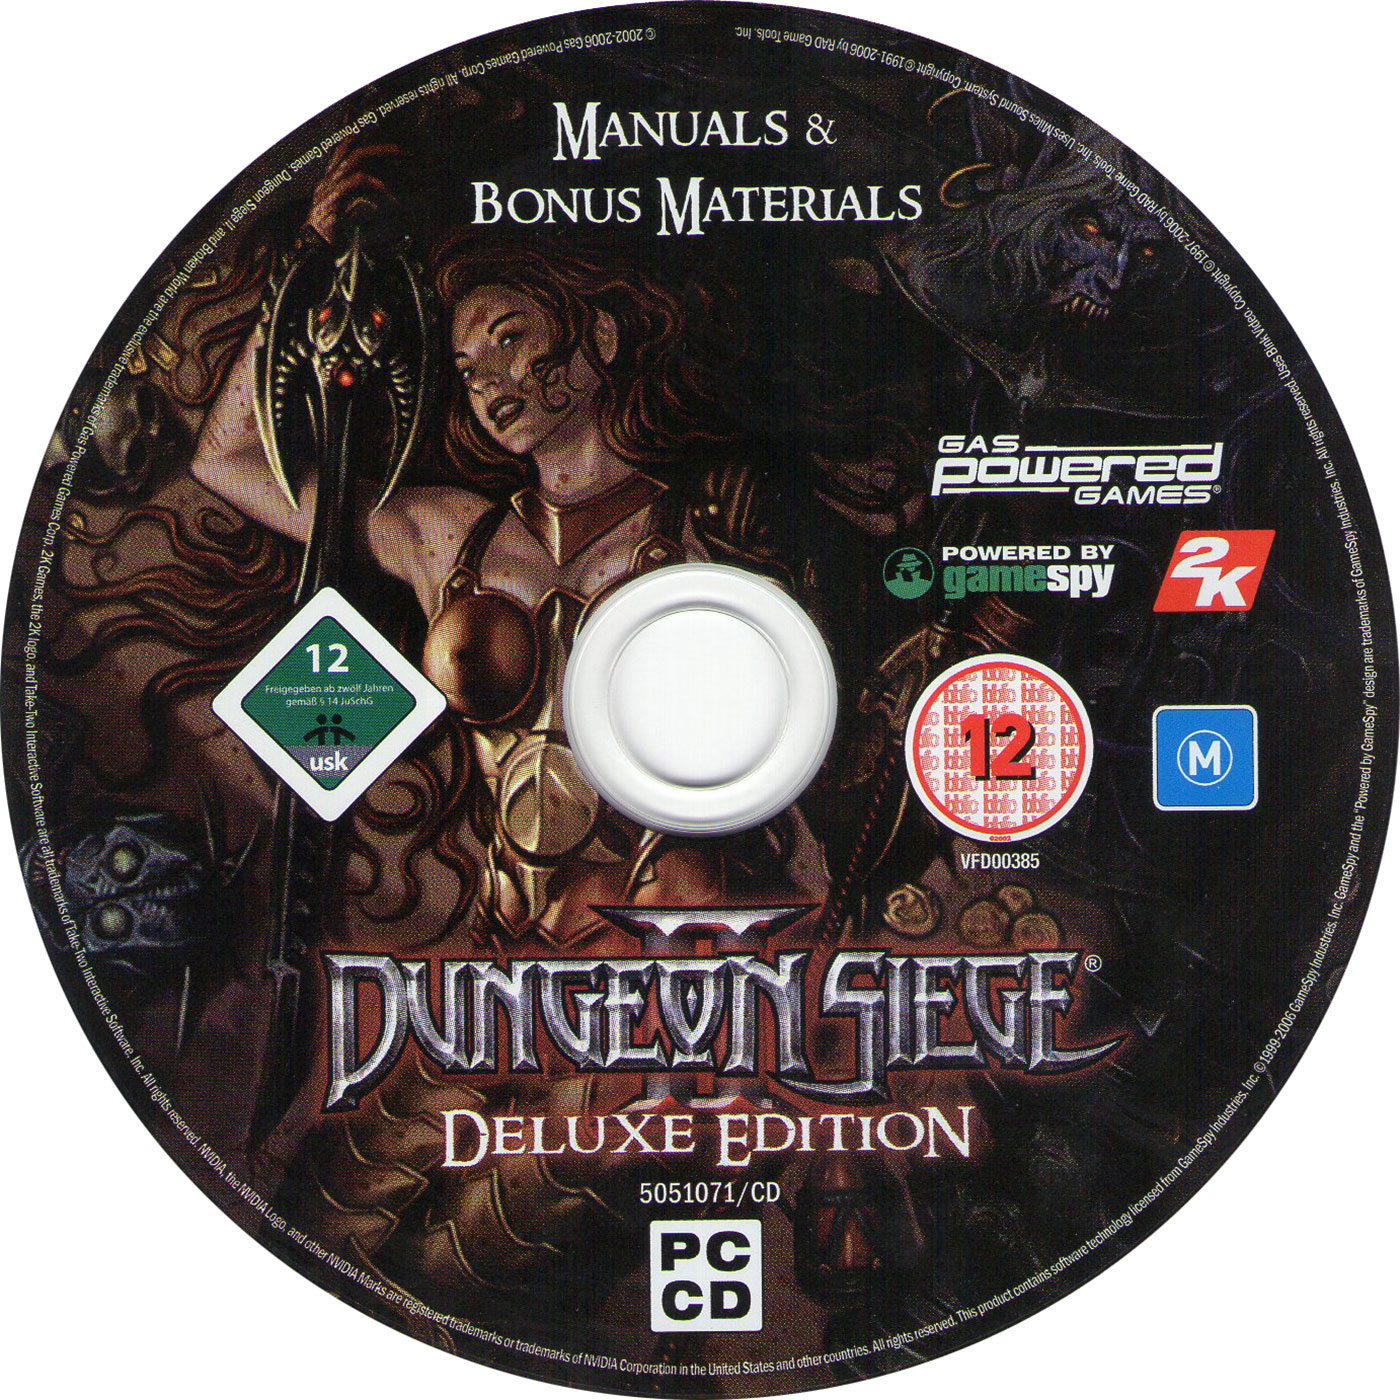 Dungeon Siege II: Deluxe Edition - CD obal 5